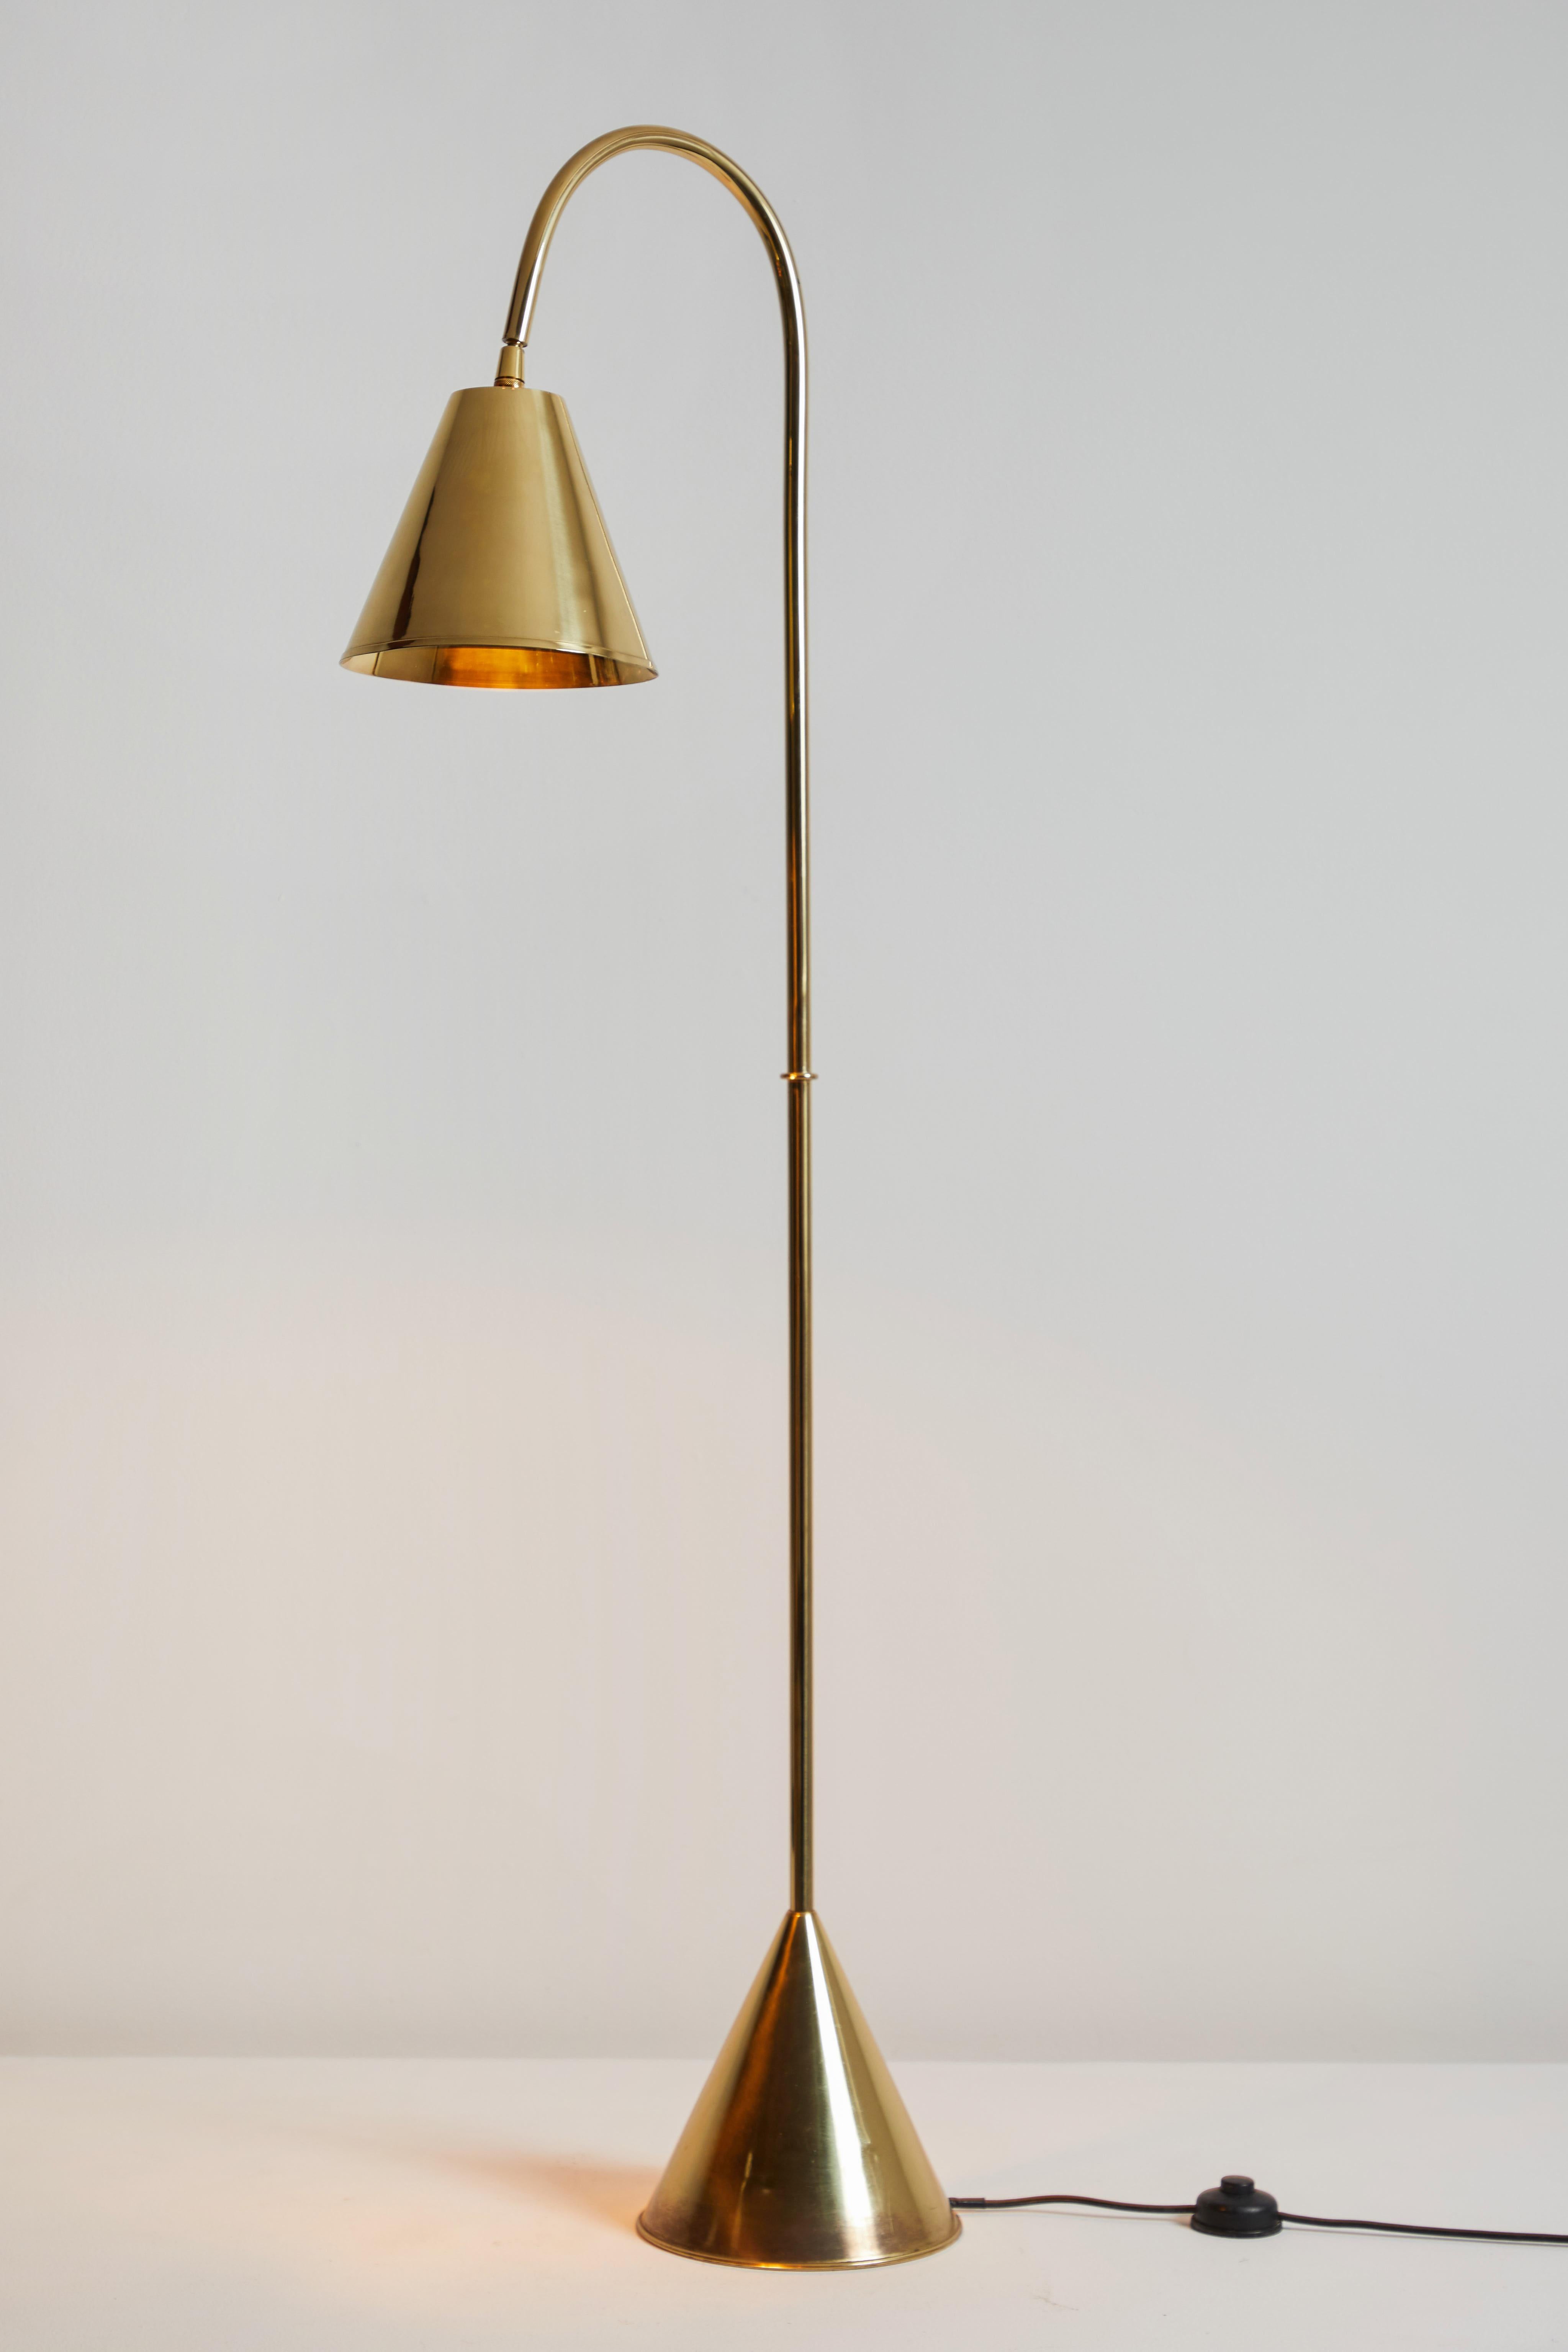 Floor Lamp by Valenti. Manufactured in Spain, circa 1950s. Brass. Original cord. Shade adjust to various positions. Takes one E27 100W maximum bulb. Bulb provided as a one time courtesy.